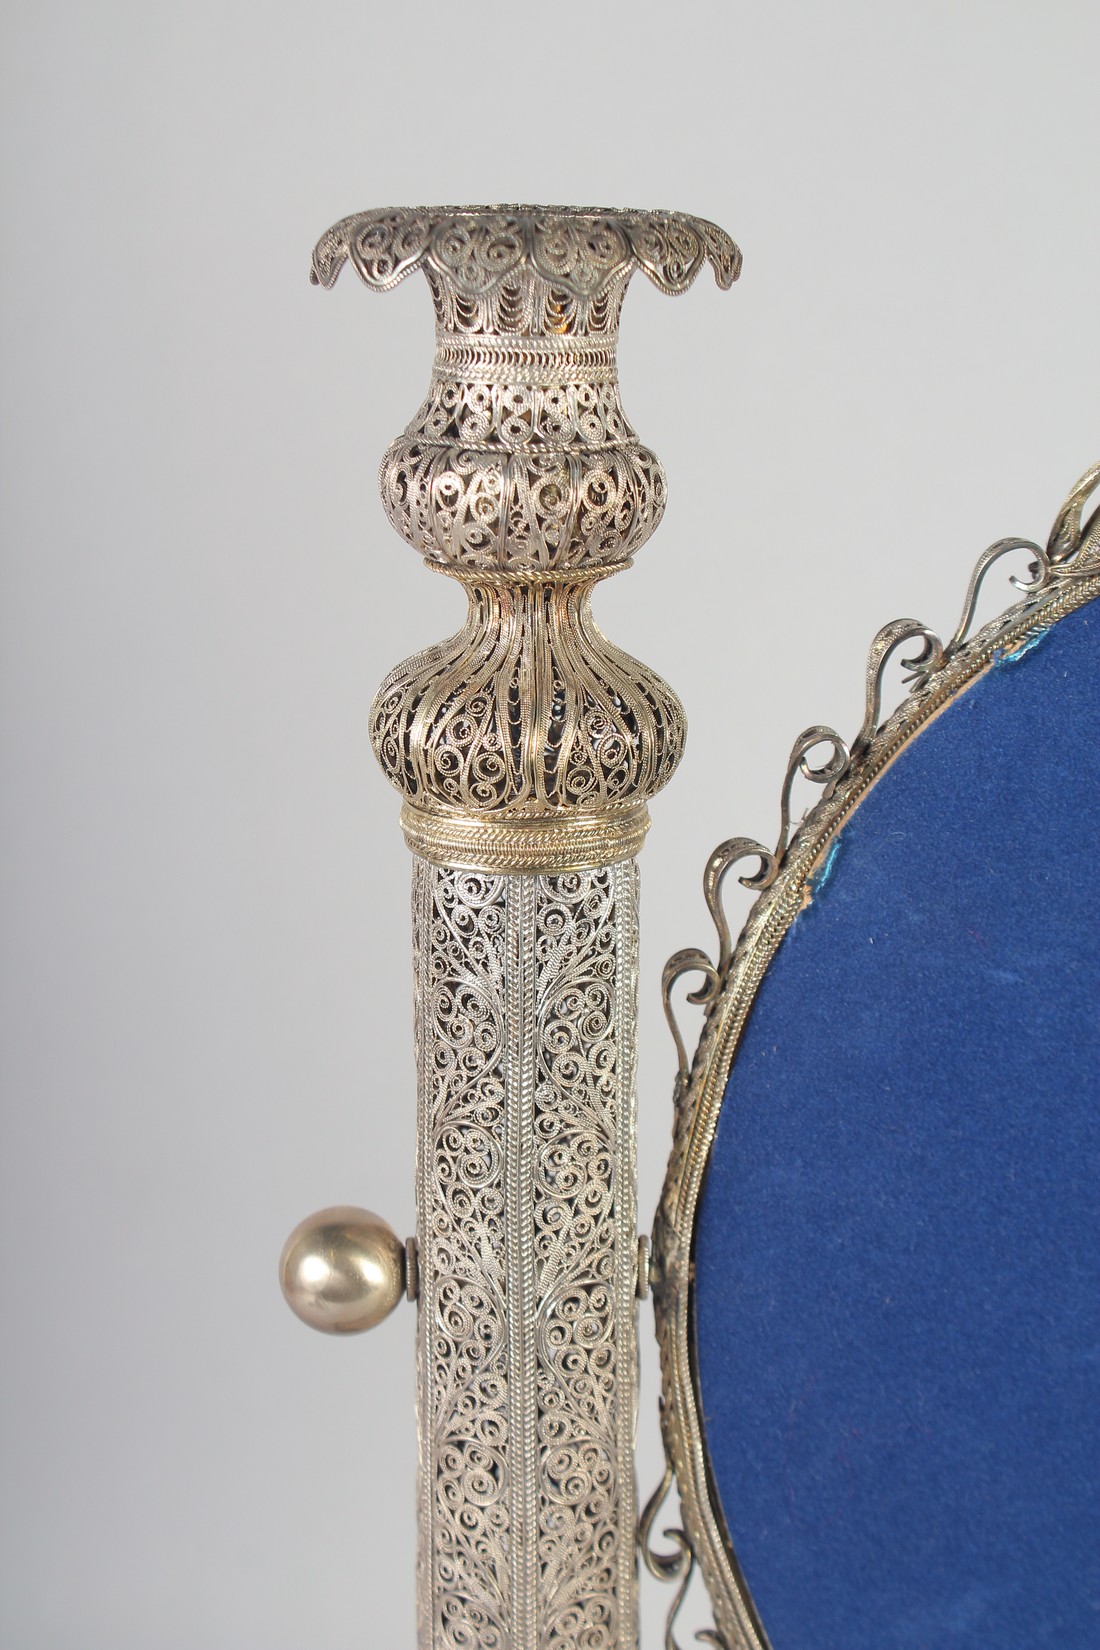 A VERY FINE AND LARGE 19TH CENTURY OTTOMAN TURKISH PARCEL GILT FILIGREE SILVER MIRROR, on a later - Image 10 of 14